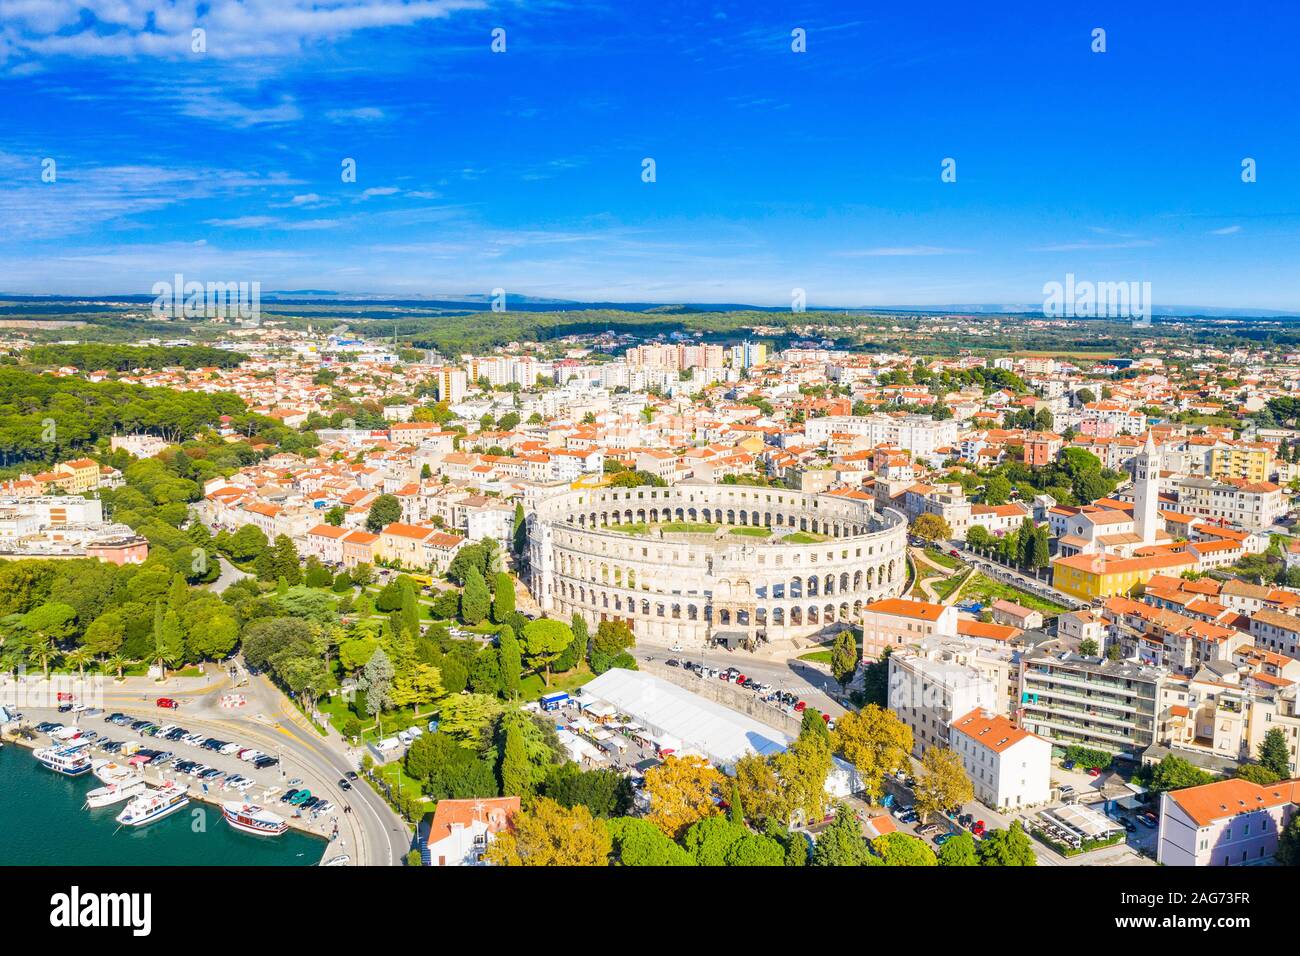 Ancient Roman arena, historic amphitheater and old town center from drone, aerial view, city of Pula, Adriatic sea, Croatia Stock Photo